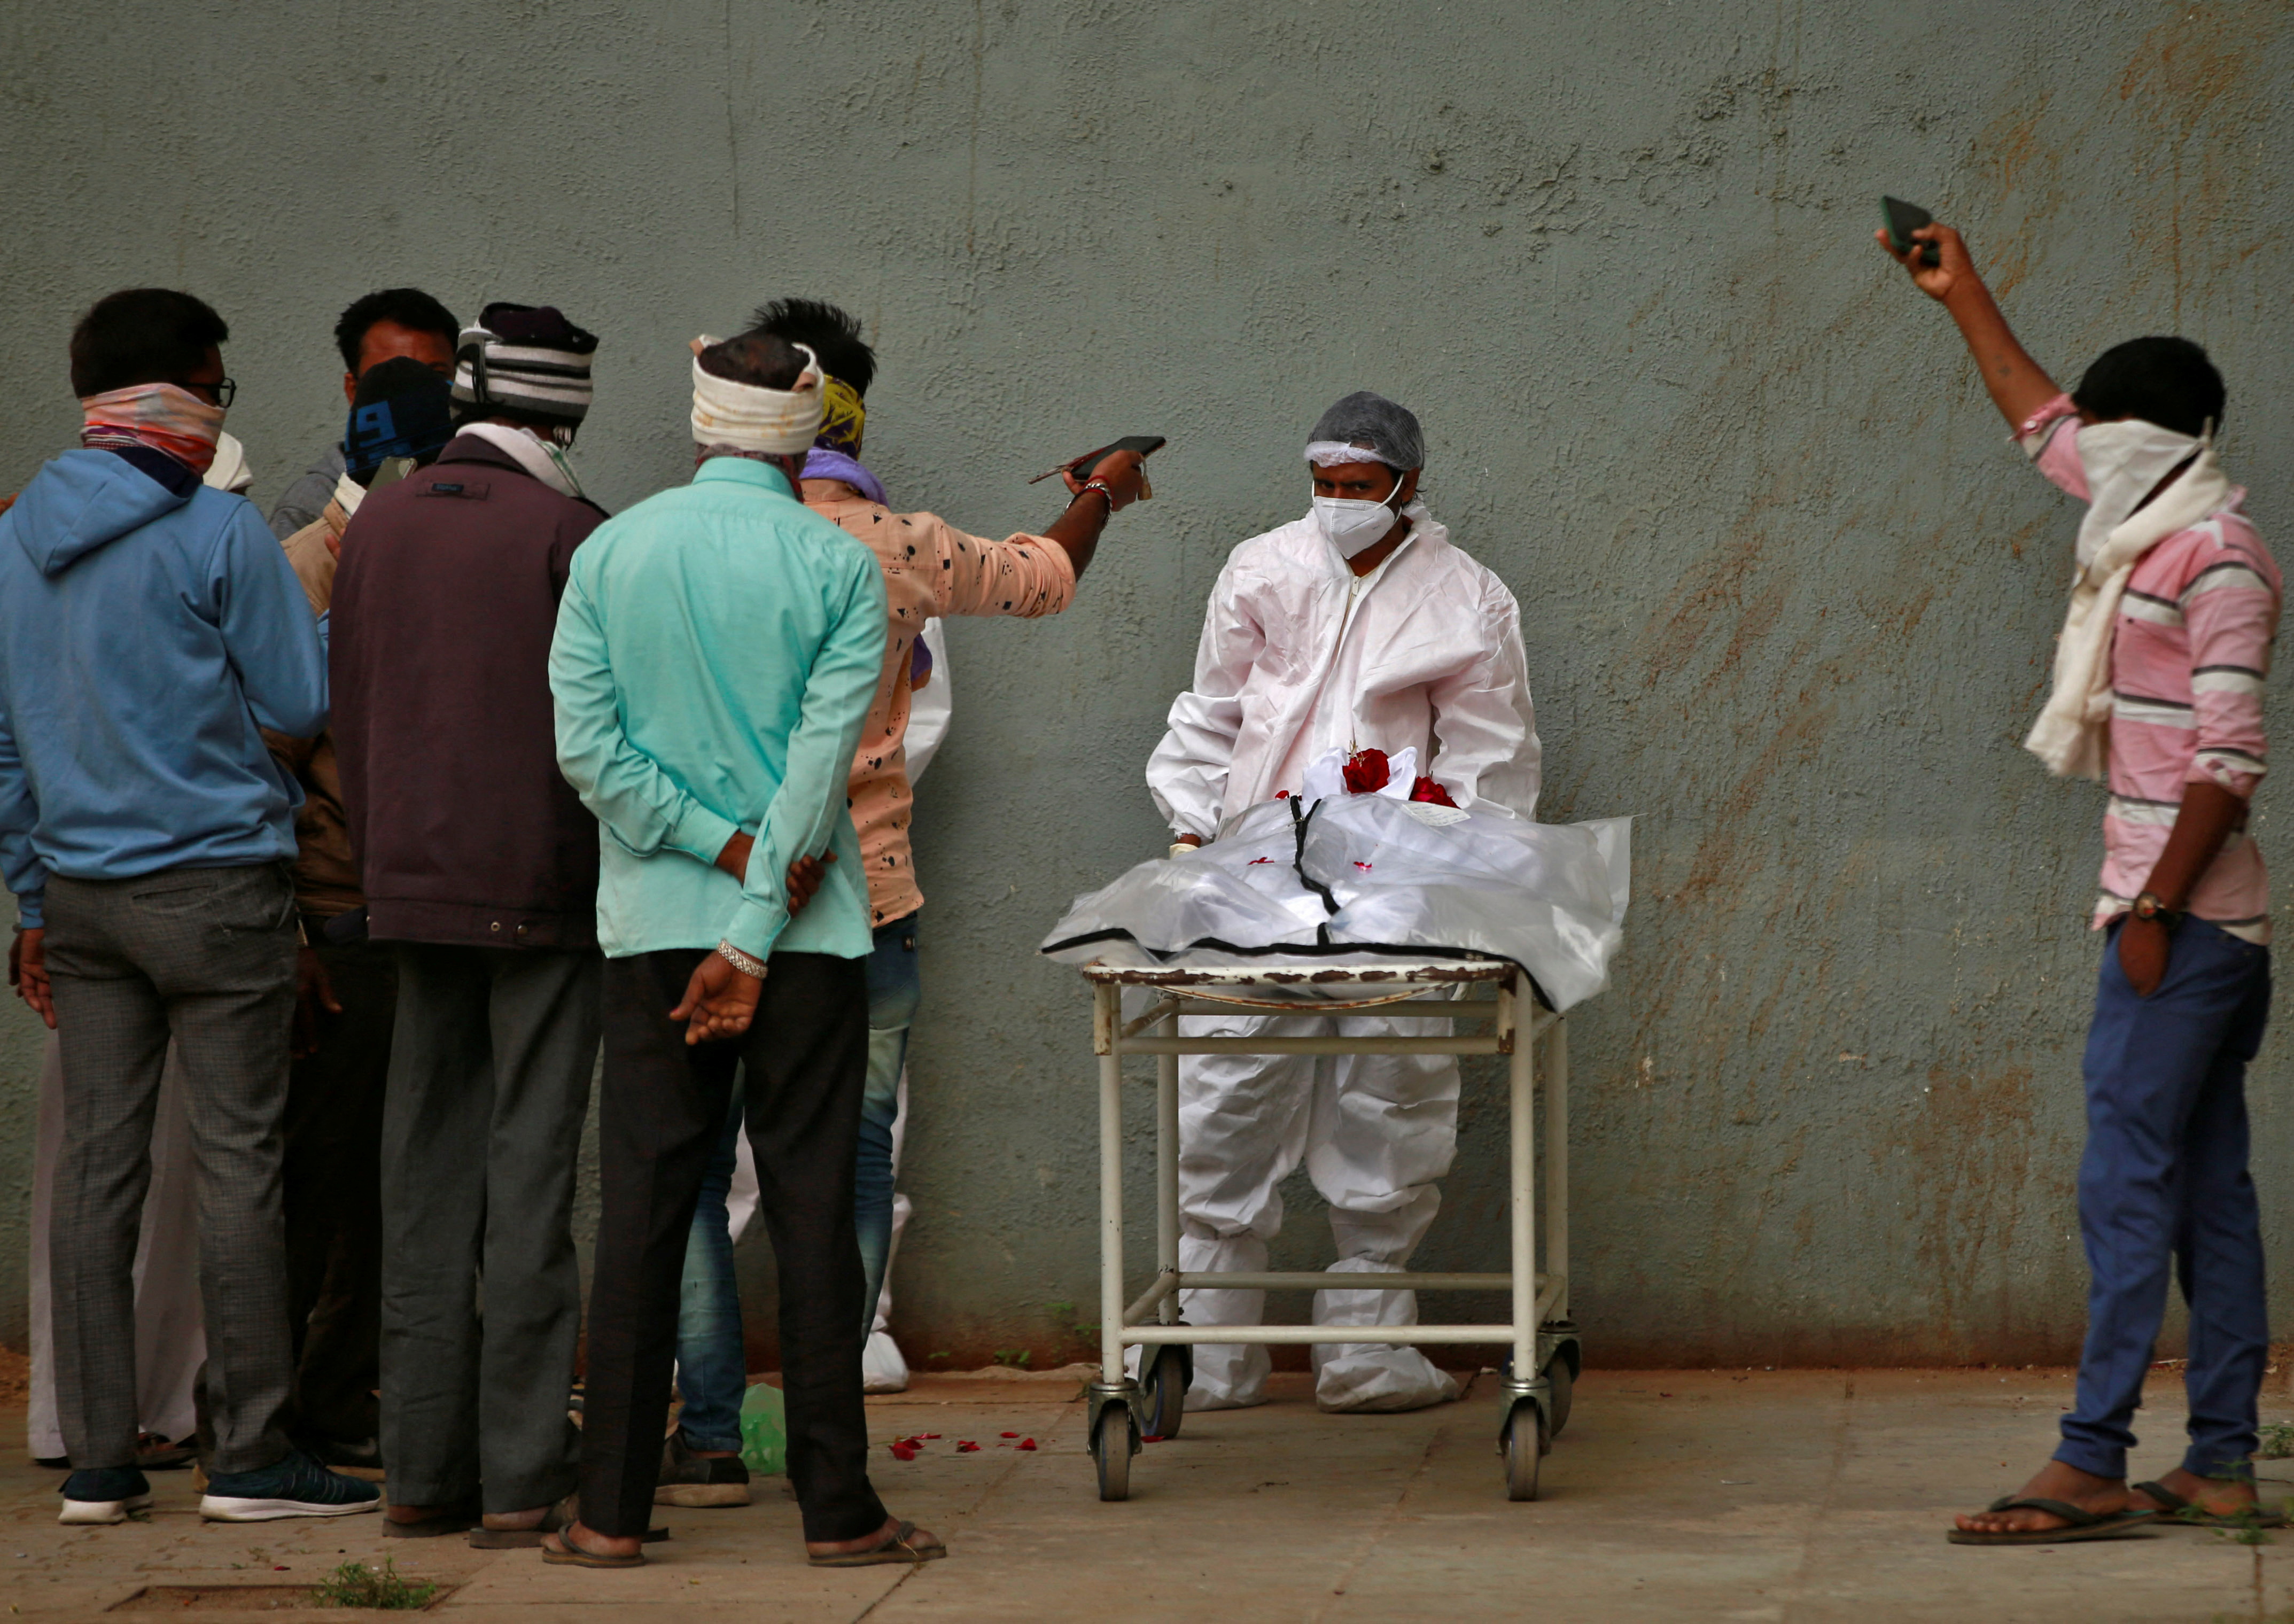 Men take photographs of the body of their relative after he died from the coronavirus disease (COVID-19) at a hospital in Ahmedabad